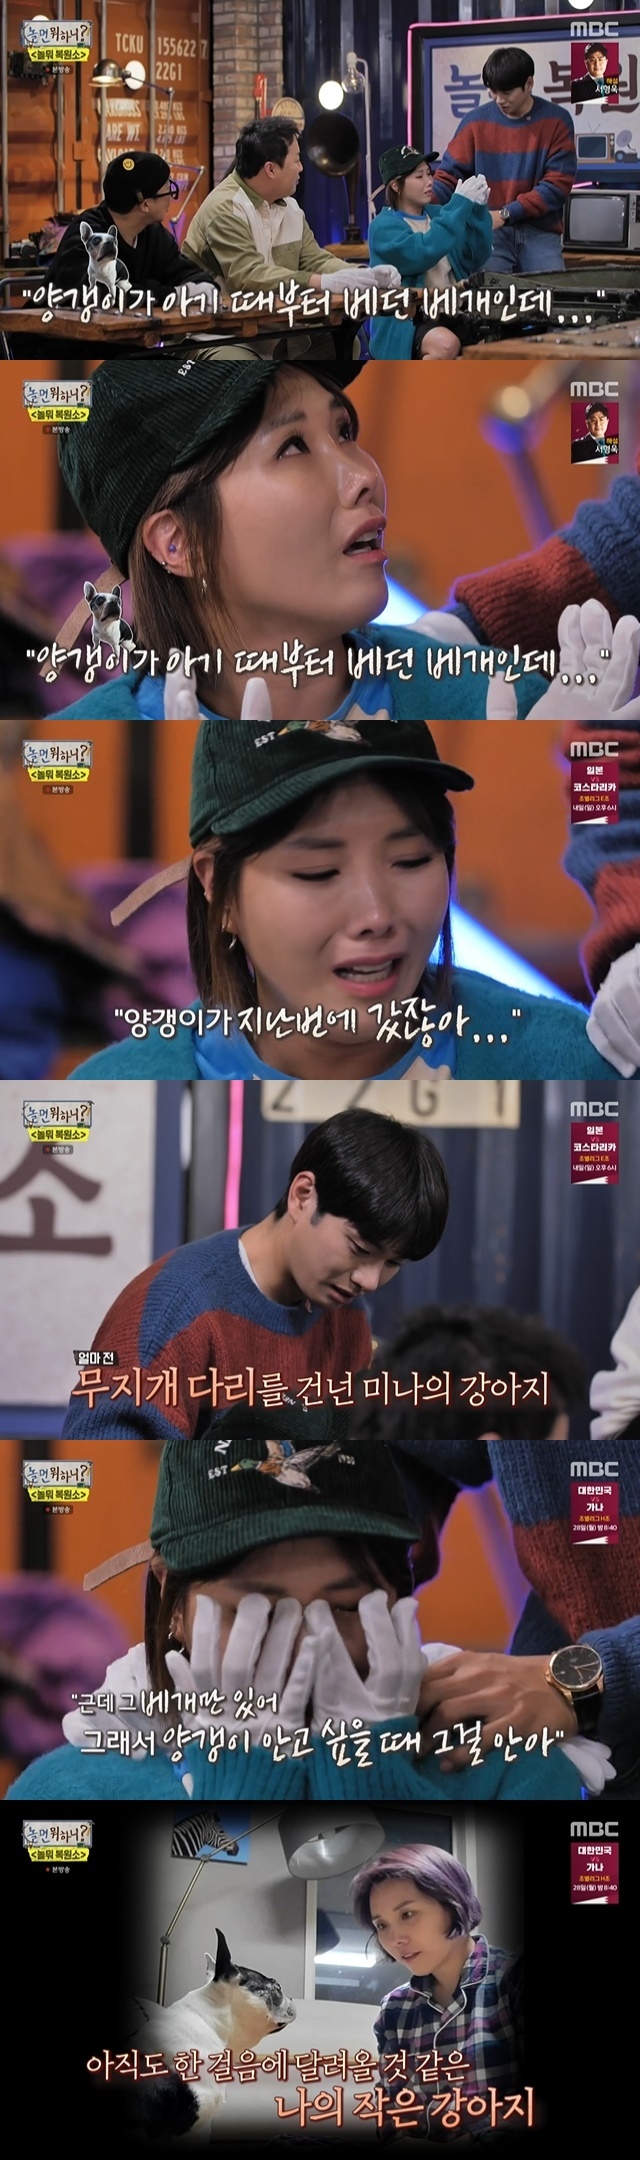 Shin Bong-sun suddenly cried at the thought of Pet who left the world.In the 161st episode of MBCs entertainment show Hangout with Yoo (hereinafter referred to as Noll What), which aired on November 26, Noll What Restoration was opened to reflect on the memories of the members.On this day, Lee Yi-kyung submitted an attachment blanket as a gift he wanted to restore. Lee Yi-kyungs hand was torn and torn now. He said he had a habit of scratching the blanket, saying, Even if you restore it, you have to feel it.As I got older, I stayed with this friend, he said. As I get older, I feel like this friend is getting worn out.Shin Bong-sun said, I have a pillow that Ive been using since I was a baby.So when I want to hold a yangkeng, I hold it, Confessions said.Yoo Jae-suk said, Mina hasnt left Yanggaengi yet. You can send her away slowly.